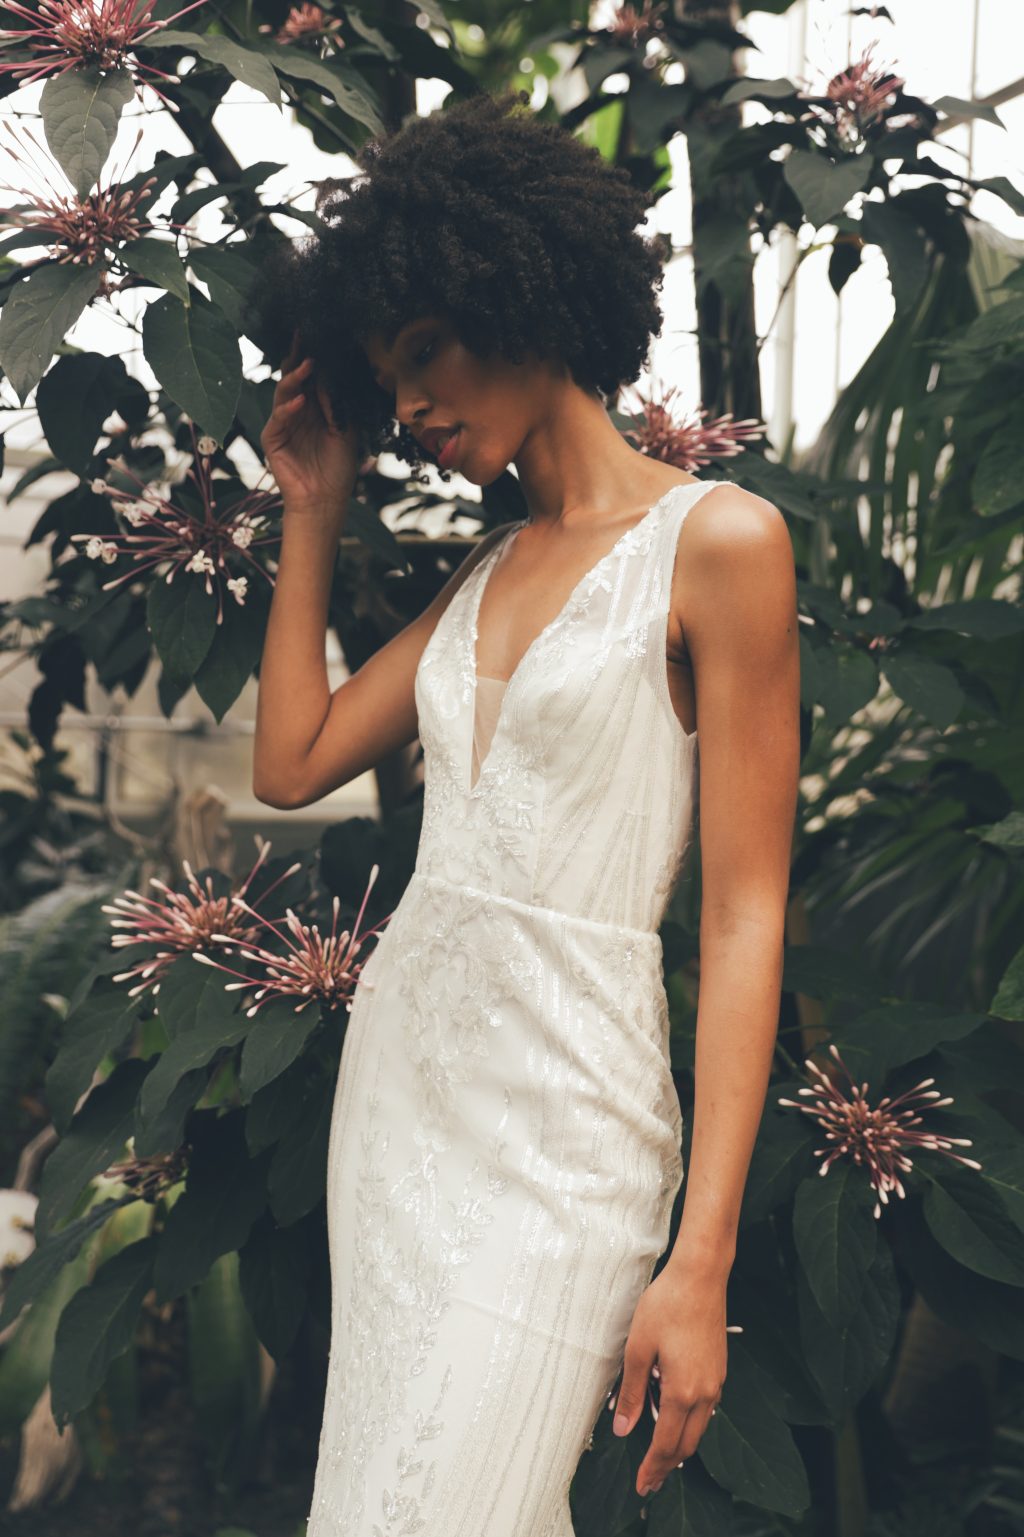 Bridal Designers: Why join GOWN Bridal Market?